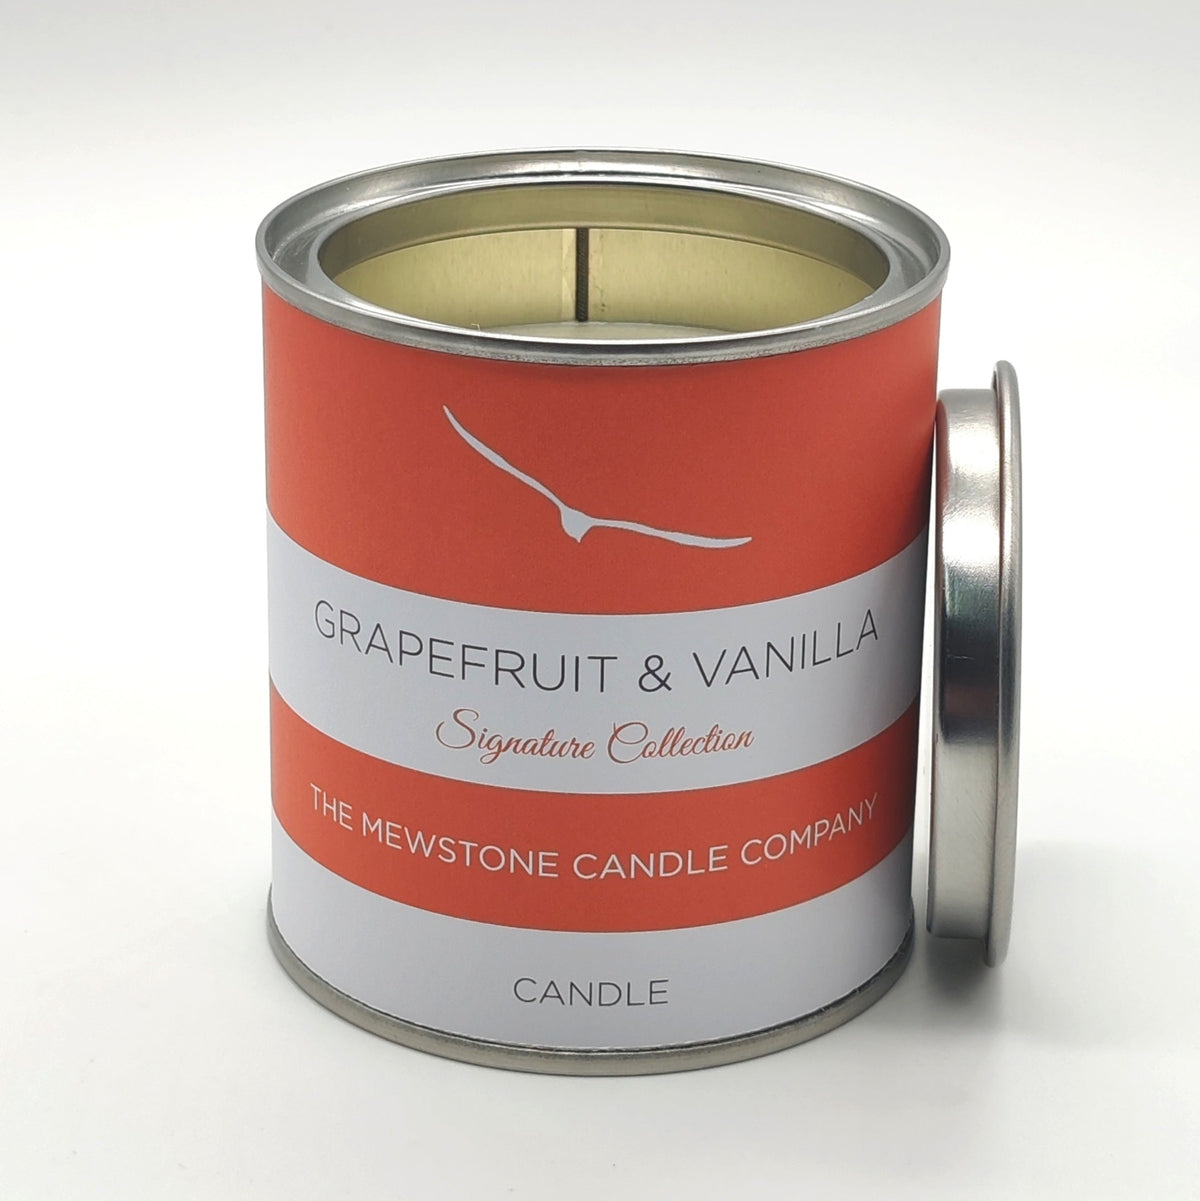 Grapefruit and Vanilla Signature Candle - The Mewstone Candle Co